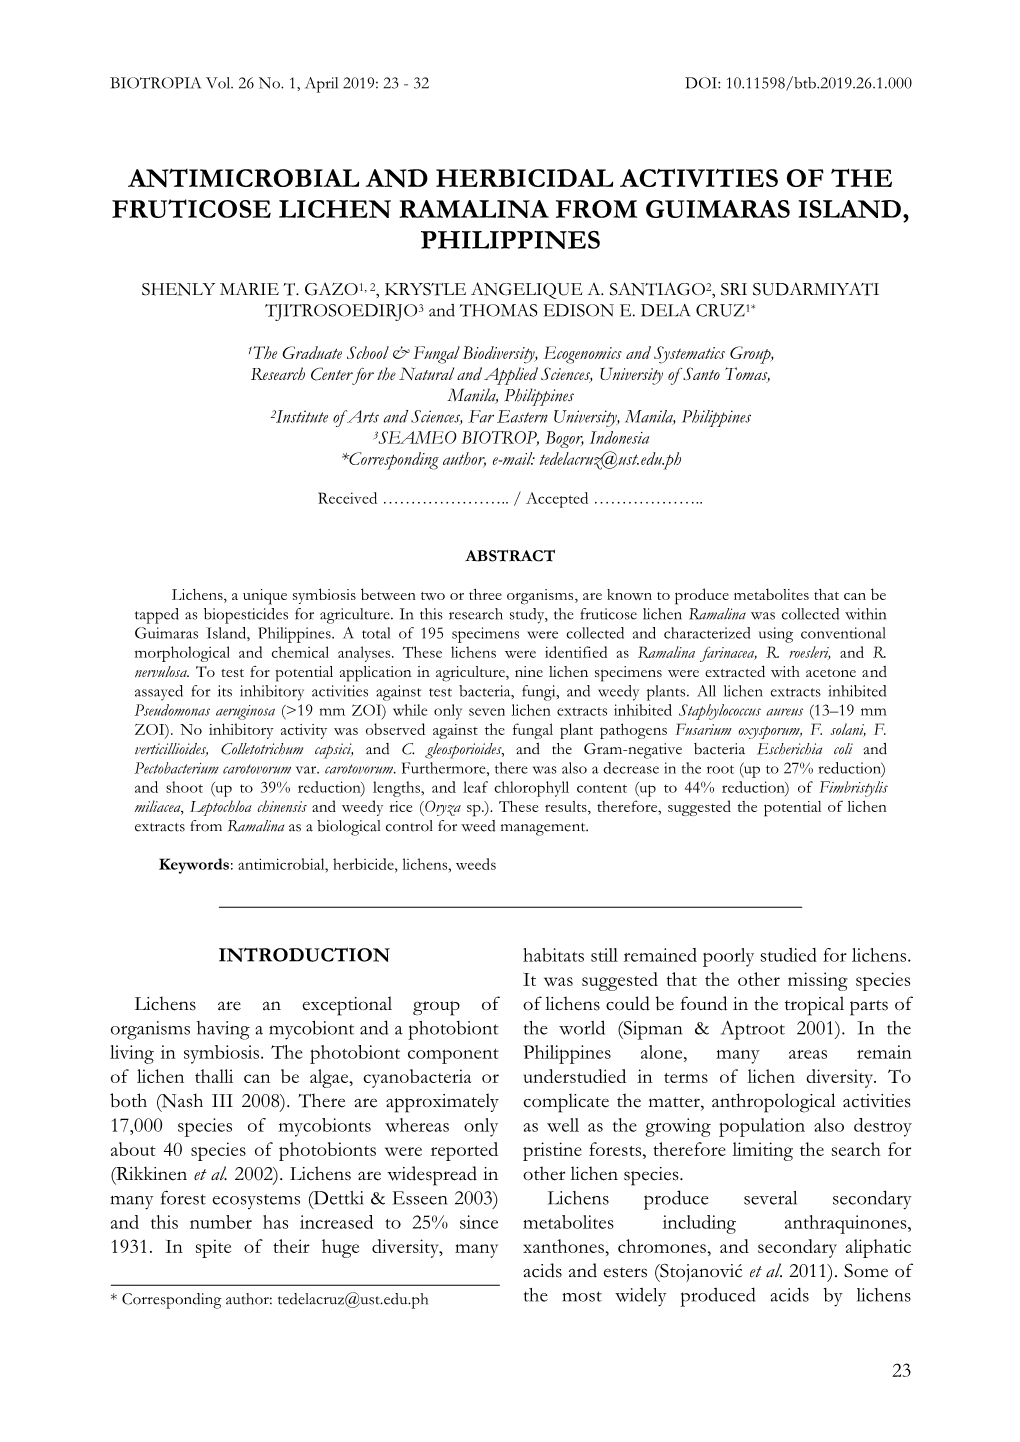 Antimicrobial and Herbicidal Activities of the Fruticose Lichen Ramalina from Guimaras Island, Philippines